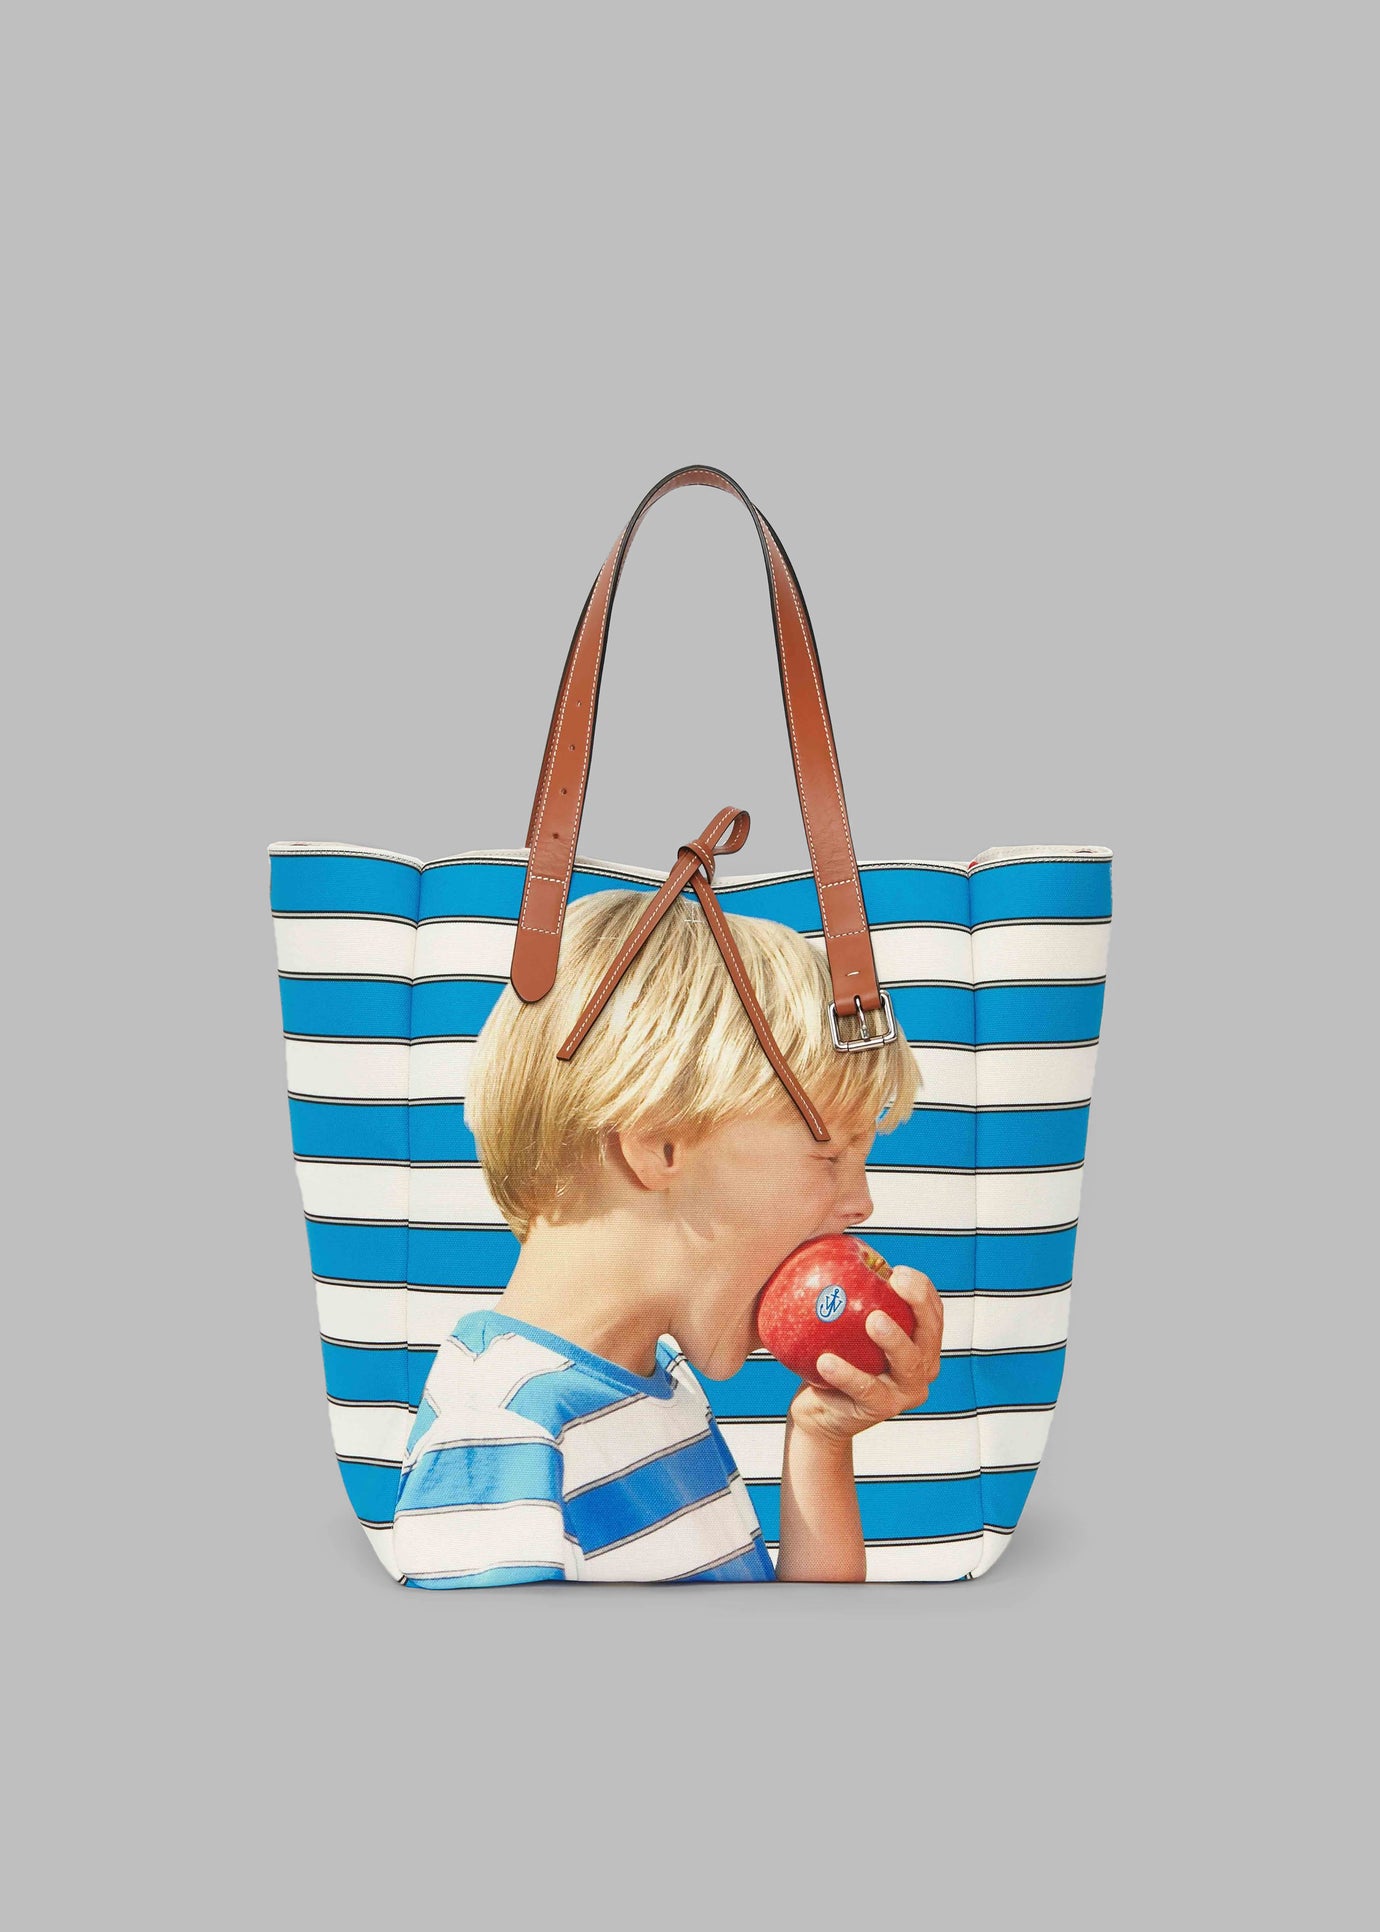 JW Anderson Boy With Apple Belt Tote - Blue/White